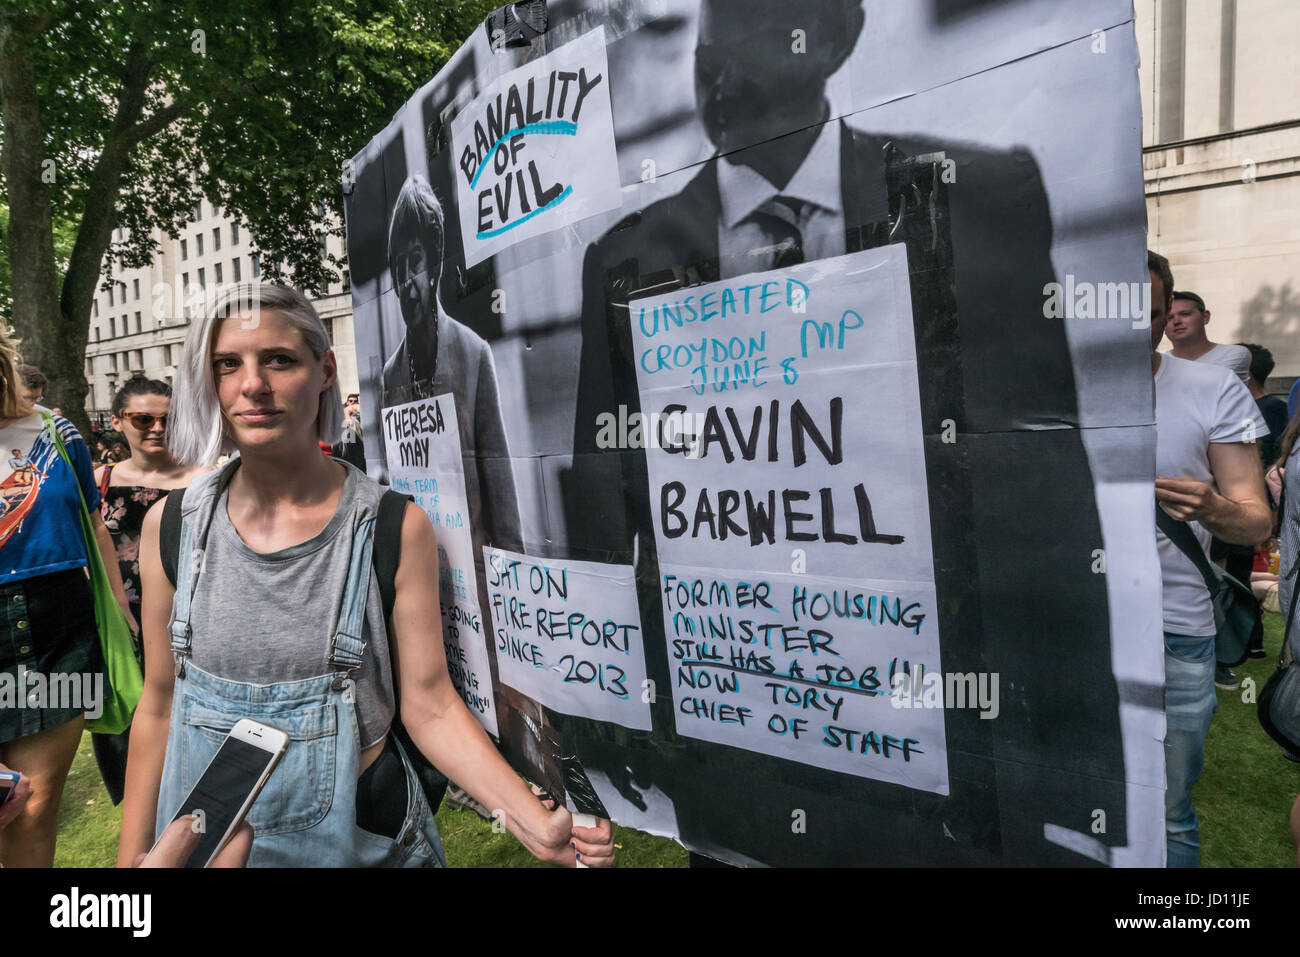 London, UK. 17th June, 2017. London, UK. 17th June, 2017. A woman stands with a large placard titled 'THe Banality of Evil' shoing Theresa May and former Croydon MP Gavin Barwell, now Tory Chief of Staff, who sat on the fire report by the coroner in 2013 at the protest at Downing St calling on Theresa May to resign. Peter Marshall Images Live Credit: Peter Marshall/ImagesLive/ZUMA Wire/Alamy Live News Stock Photo